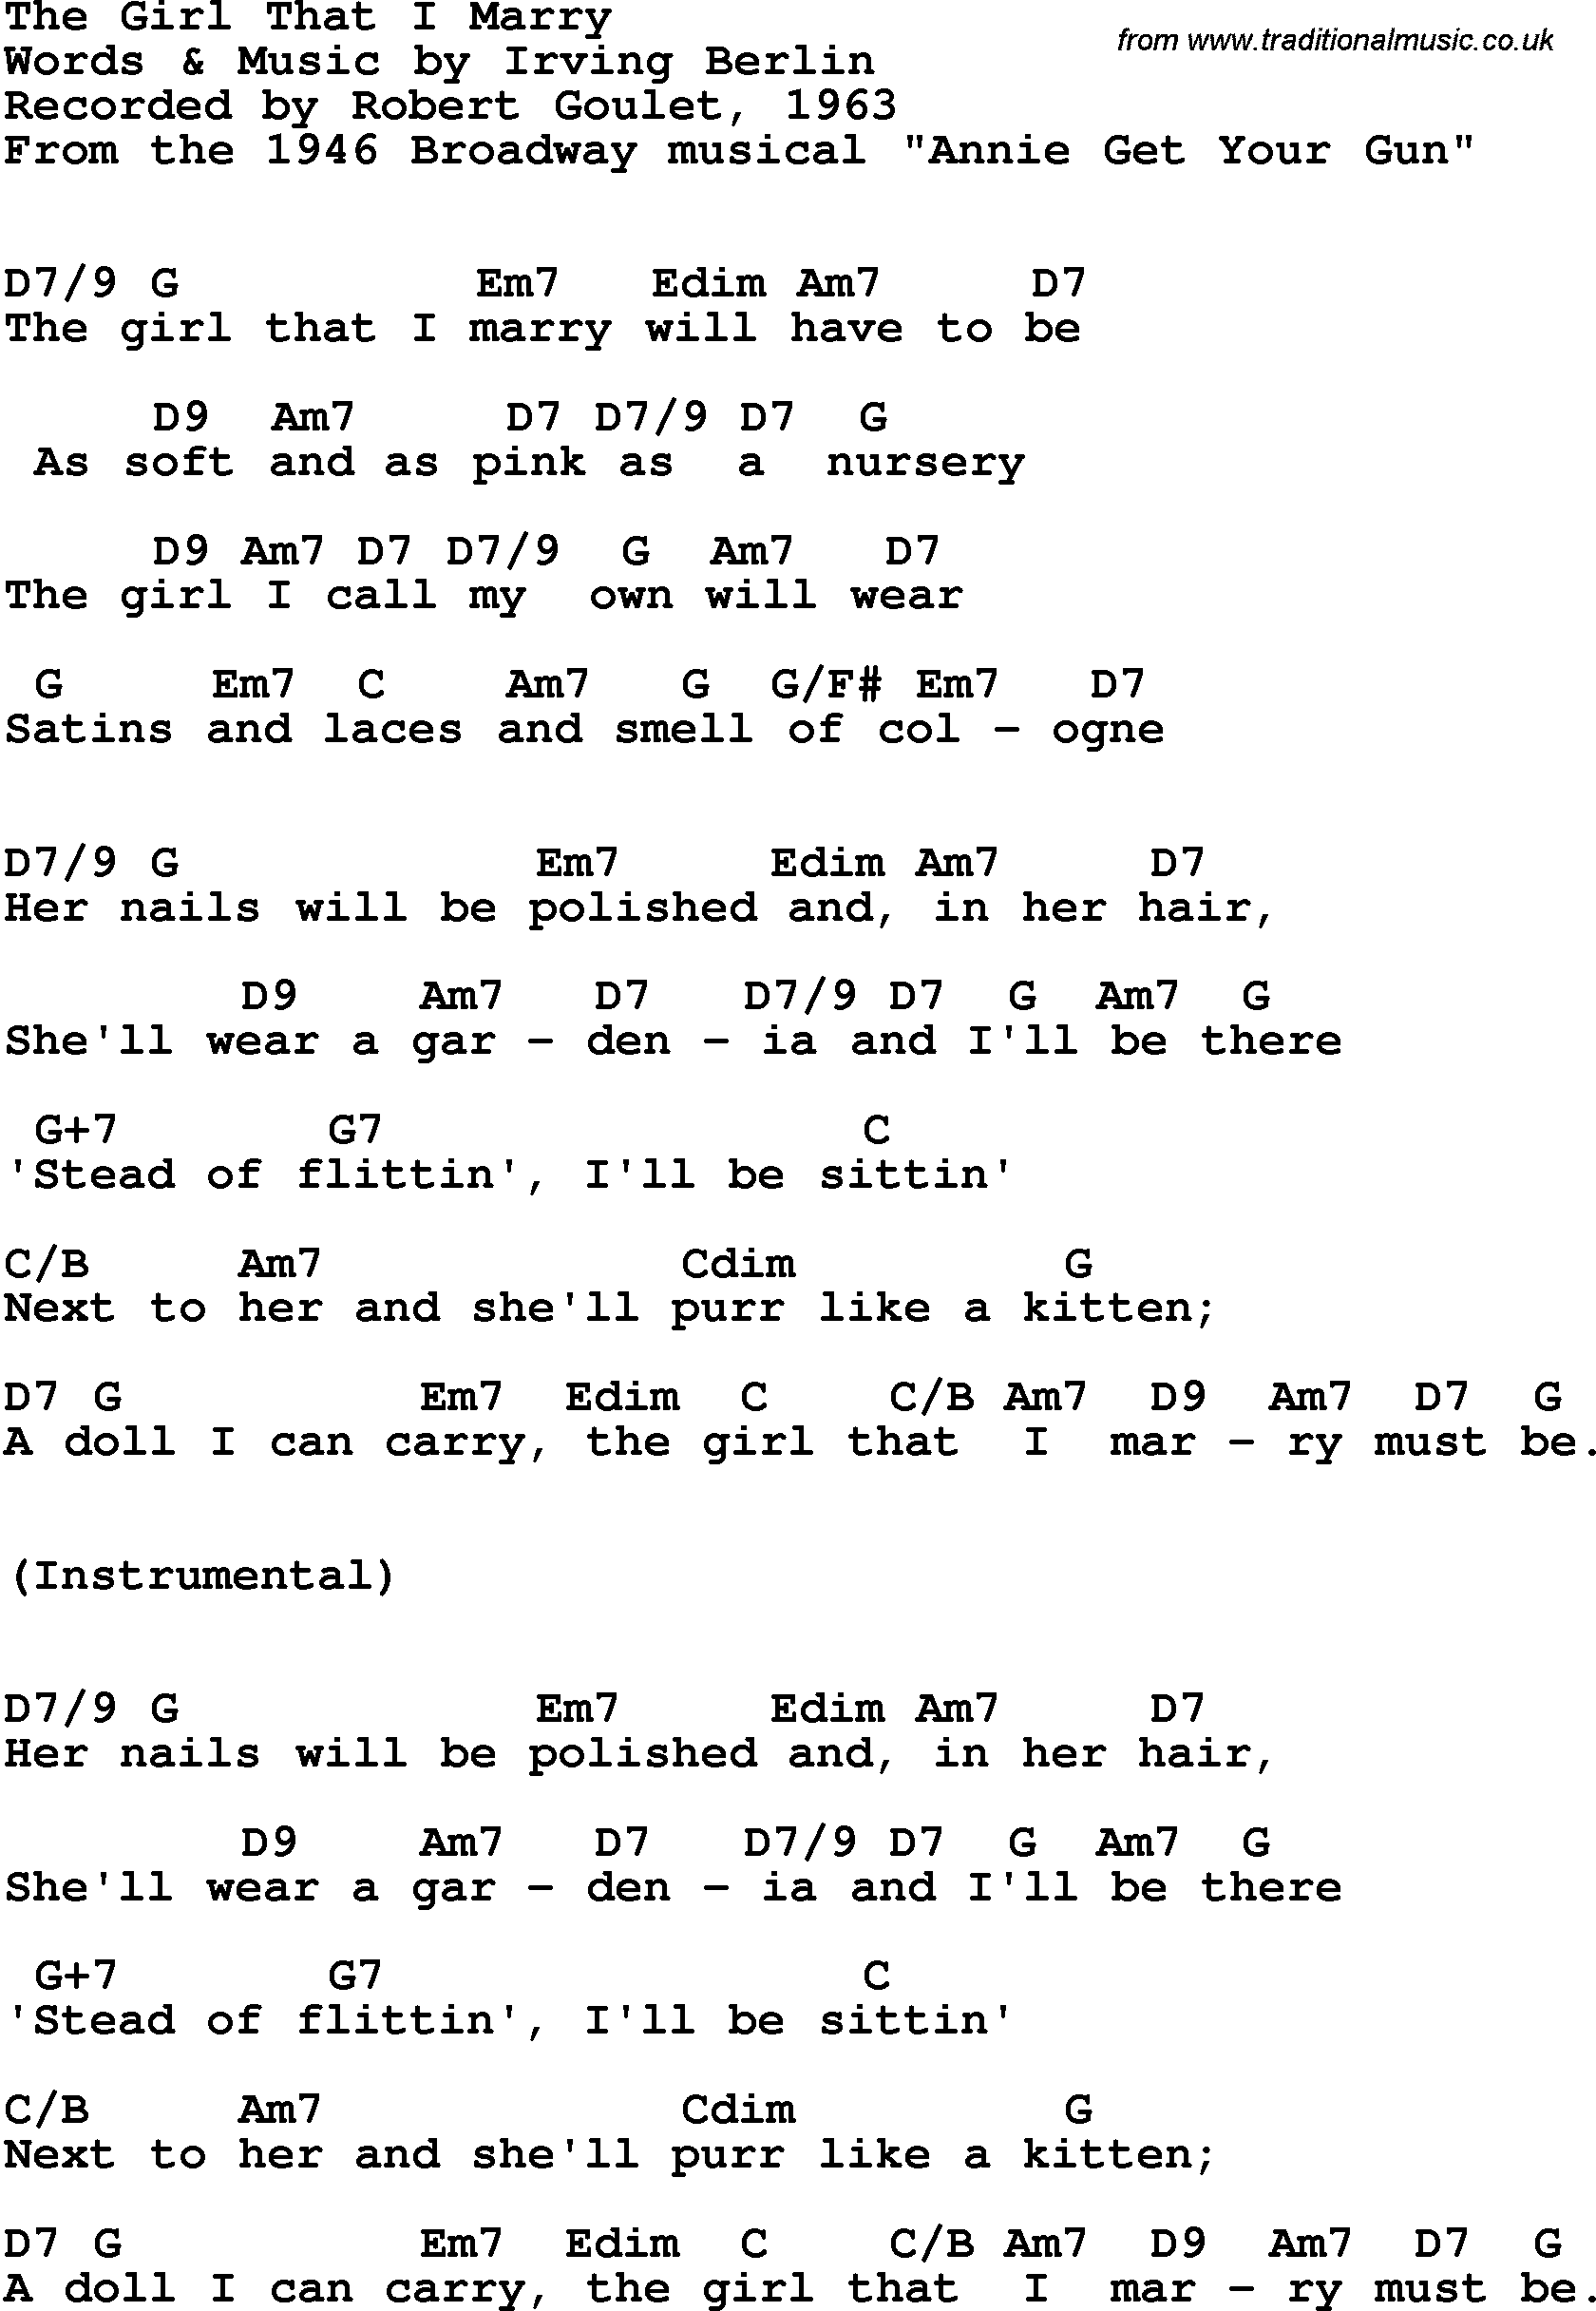 Song Lyrics with guitar chords for Girl That I Marry, The - Robert Goulet, 1963